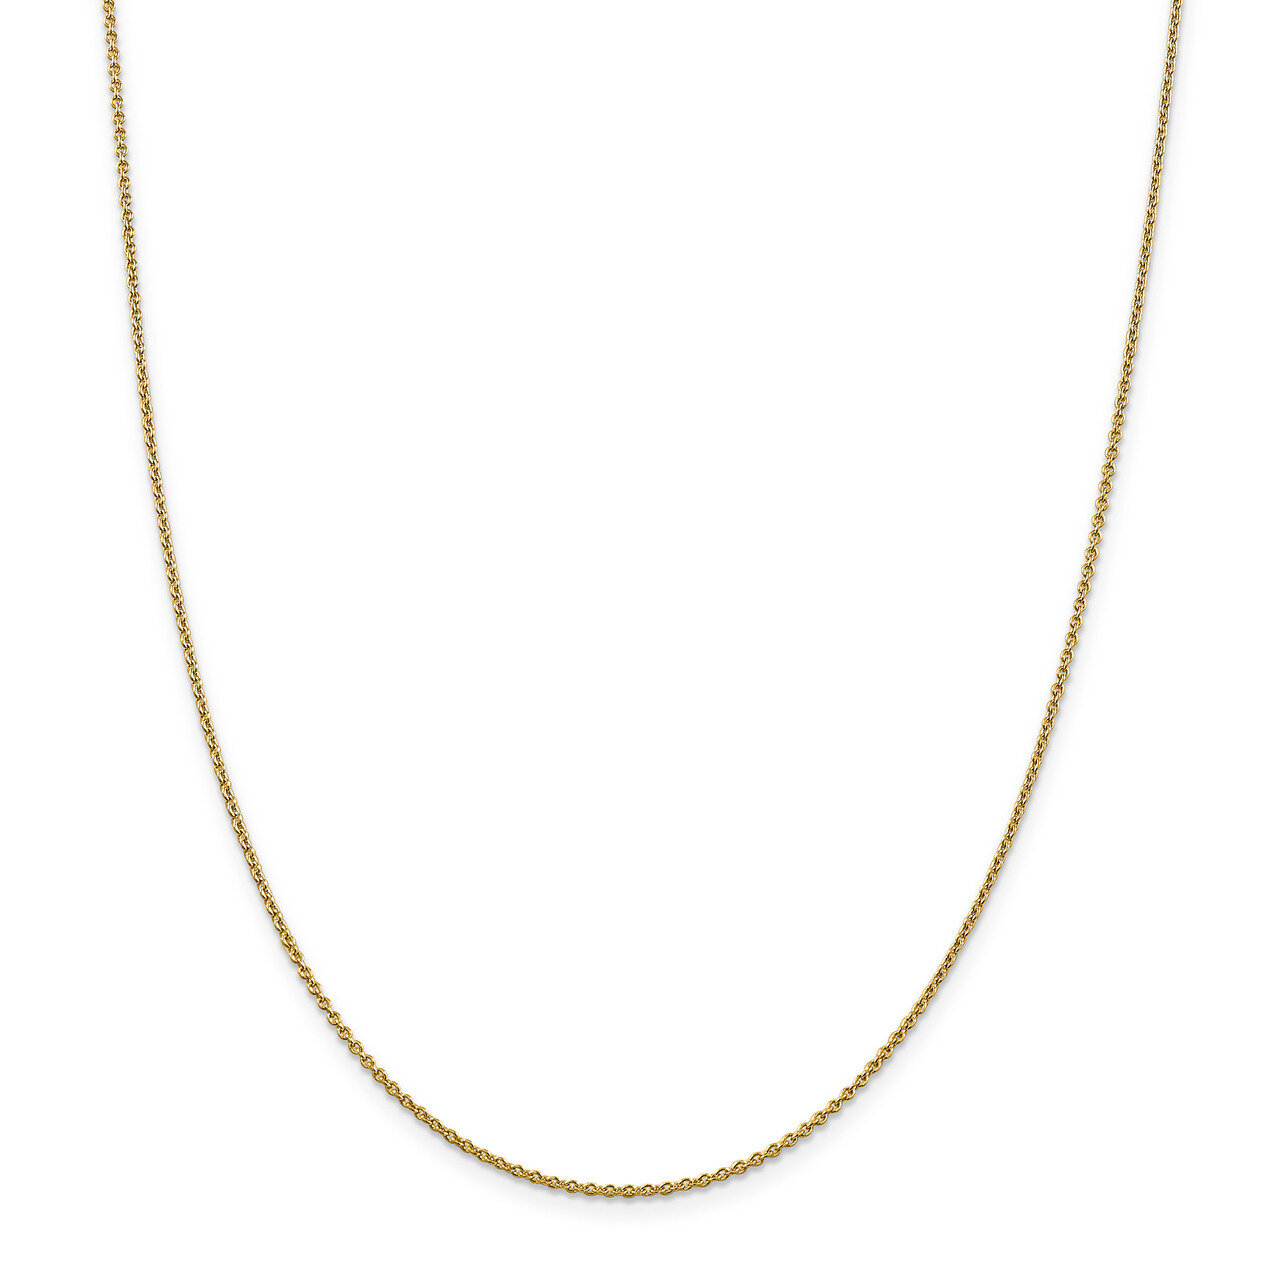 10 Inch 1.4mm Solid Polished Cable Chain 14k Gold PEN328-10